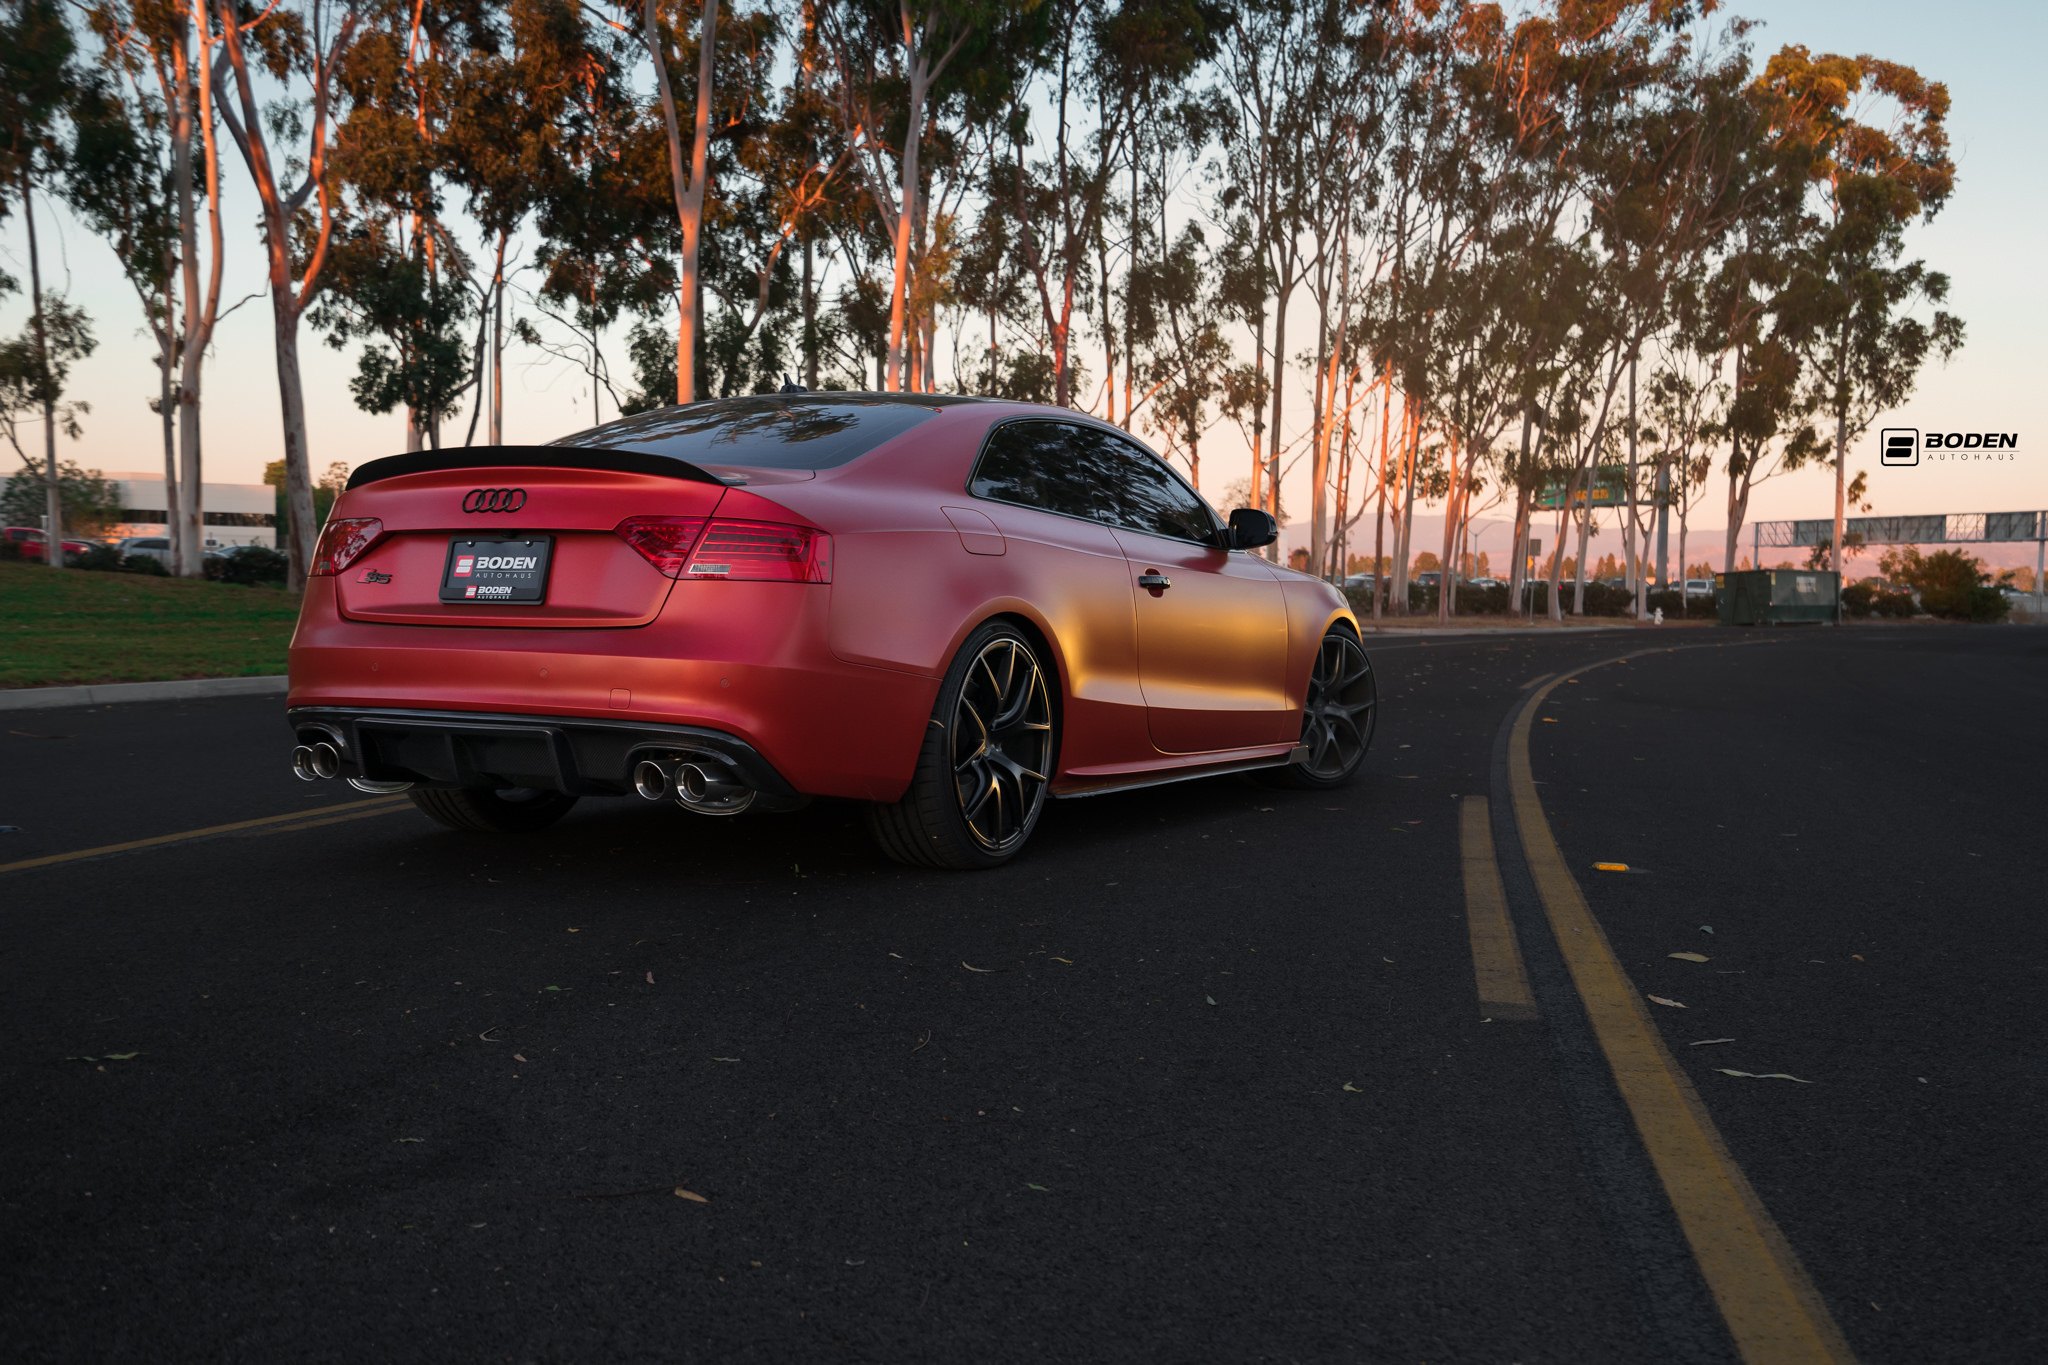 Custom Matte Red Audi S5 Rear Lip Spoiler - Photo by Boden Autohaus